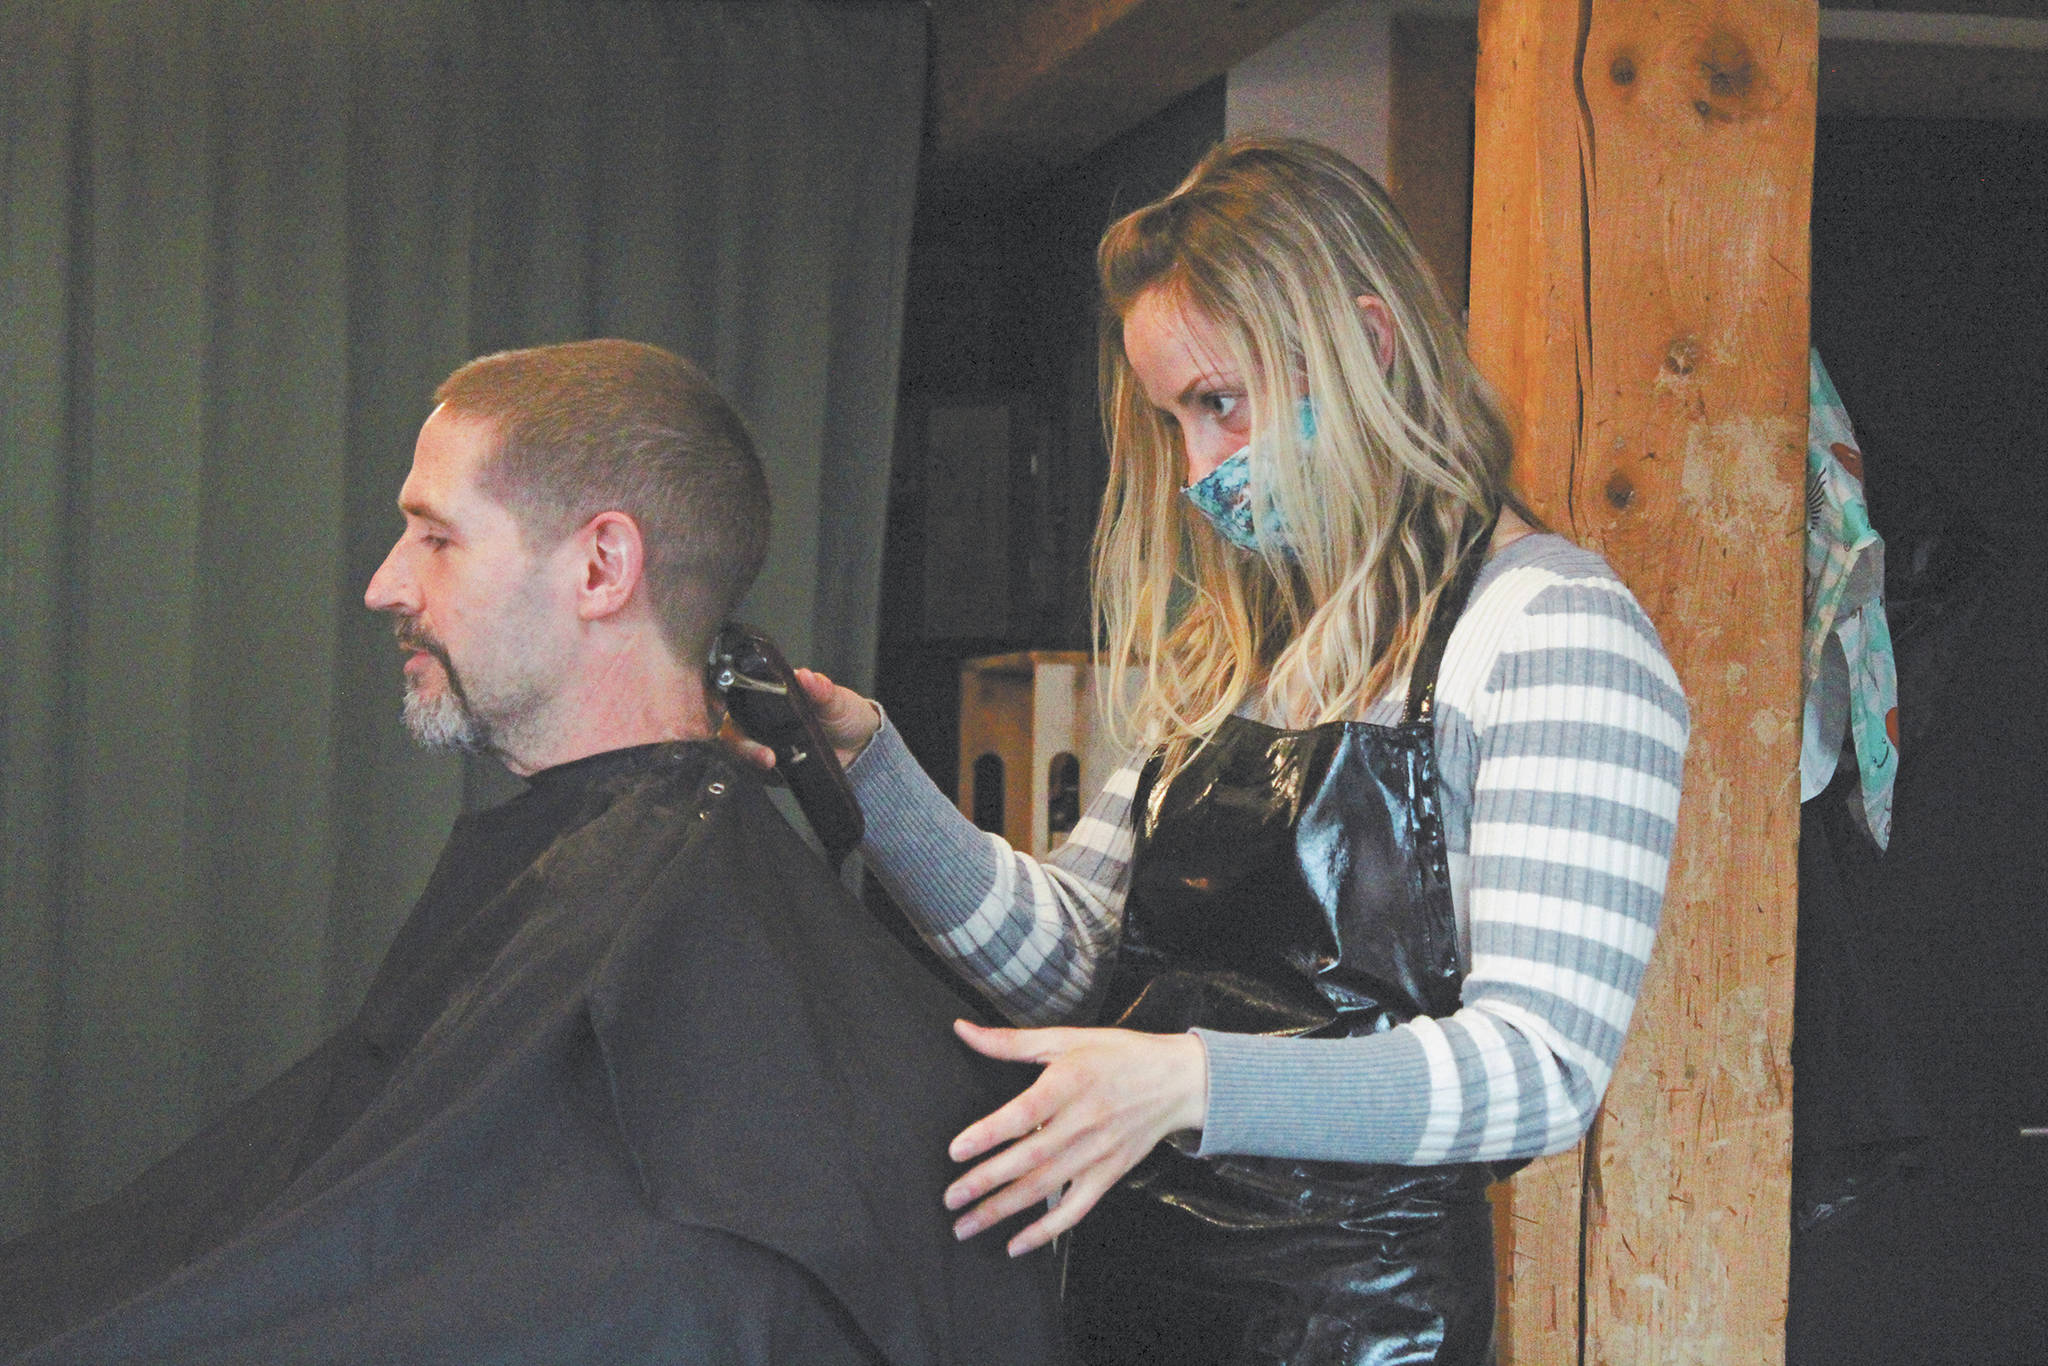 Ashley Story gives a haircut to client Michael Halstead on Friday, April 24, 2020 at her salon Short Cuts on Lake Street in Homer, Alaska. Story’s is one of several Homer businesses to reopen their doors Friday according to relaxed state restrictions, while several others have opted to wait. (Photo by Megan Pacer/Homer News)